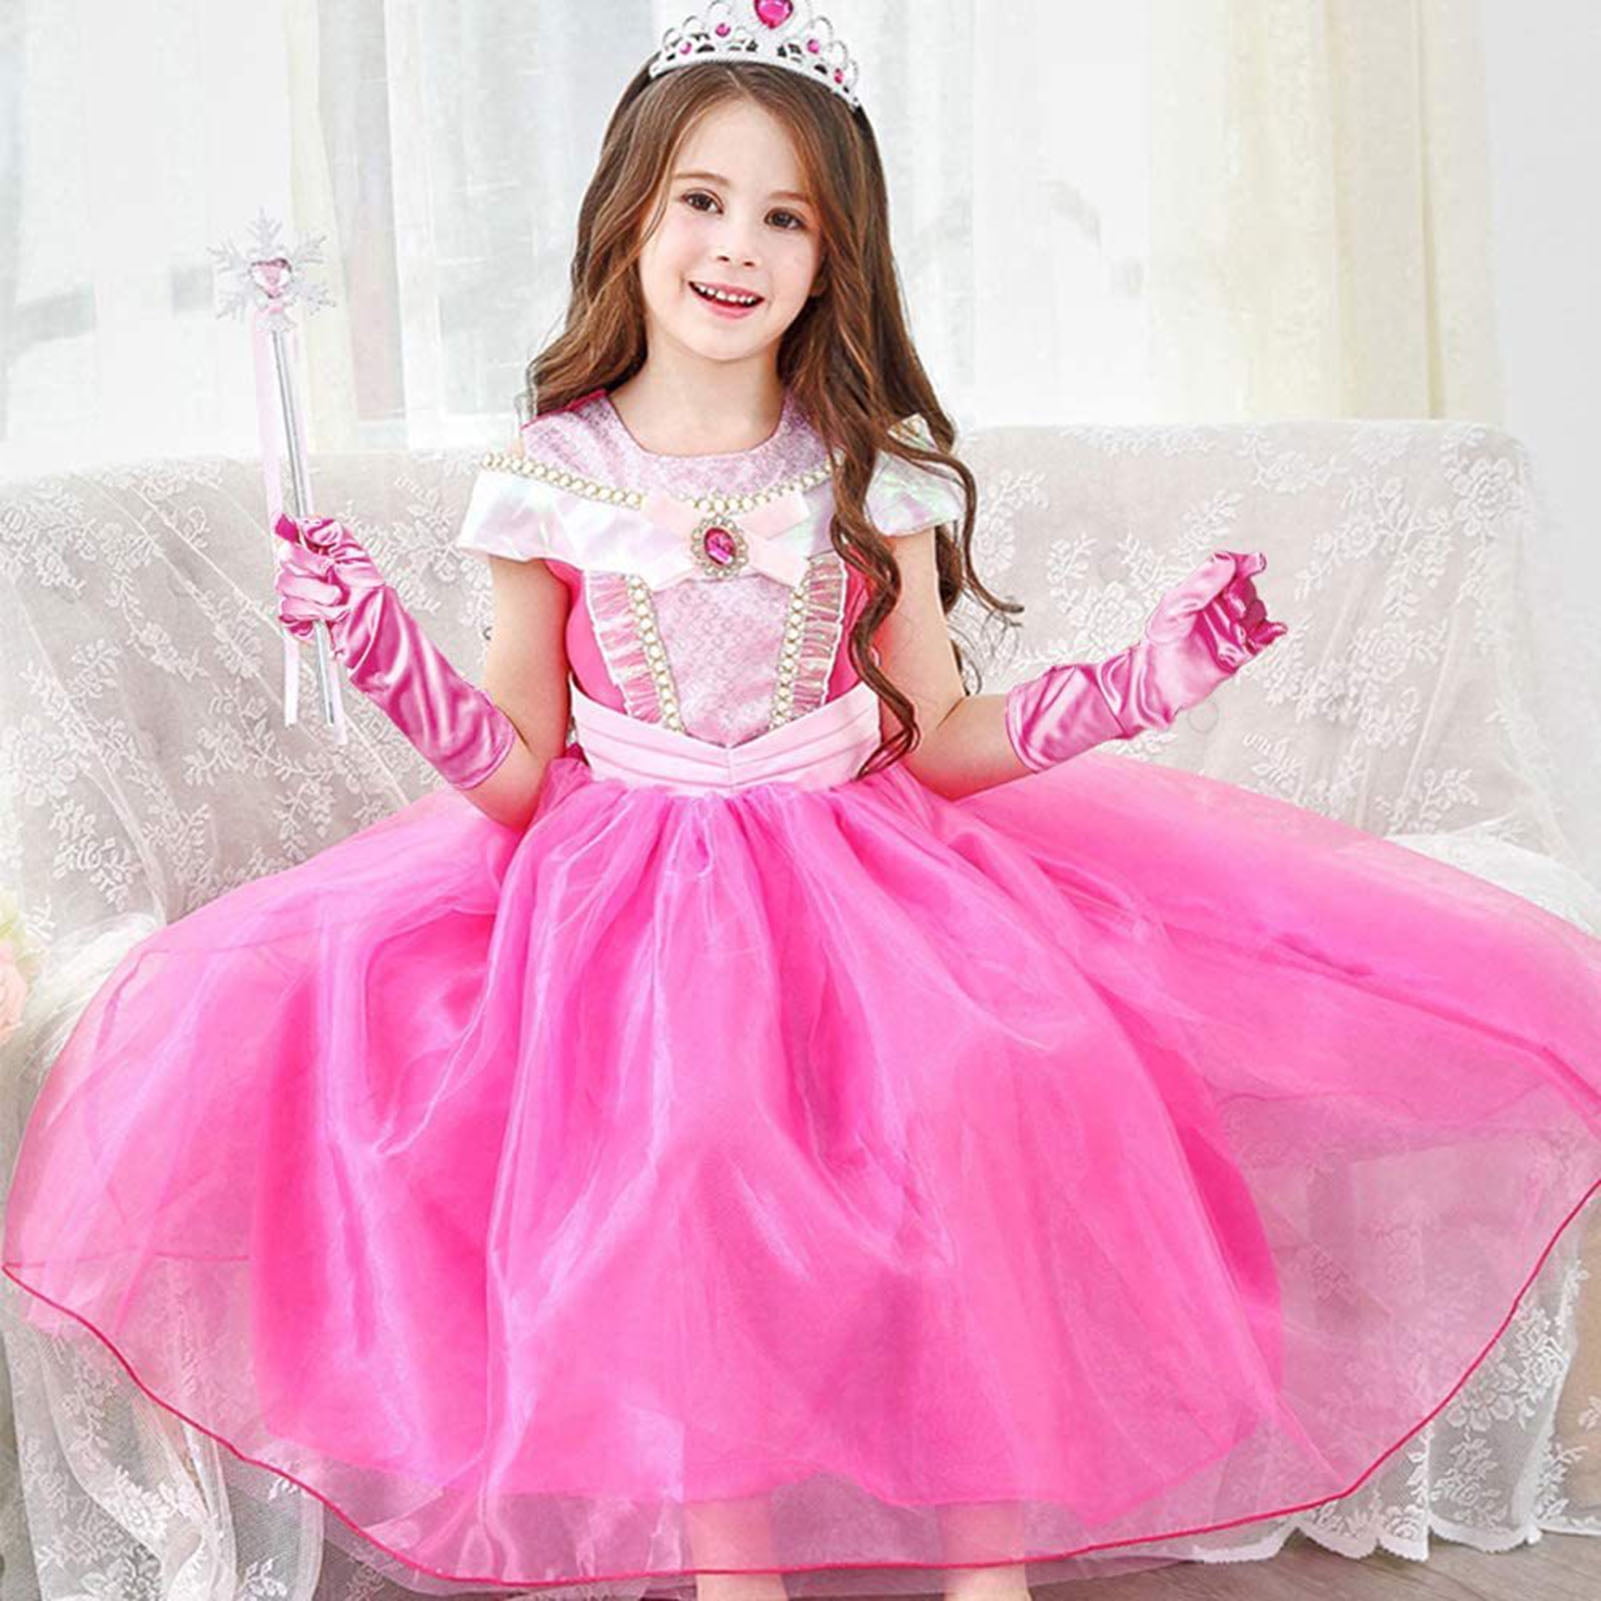 Bowknot Pair Gloves 1 Long Princess Formal Daily Faux Performance Finger Accessories Costume Stage CXDa Satin for Gloves Crystal Life Kids Full Shiny Dress-up Silky